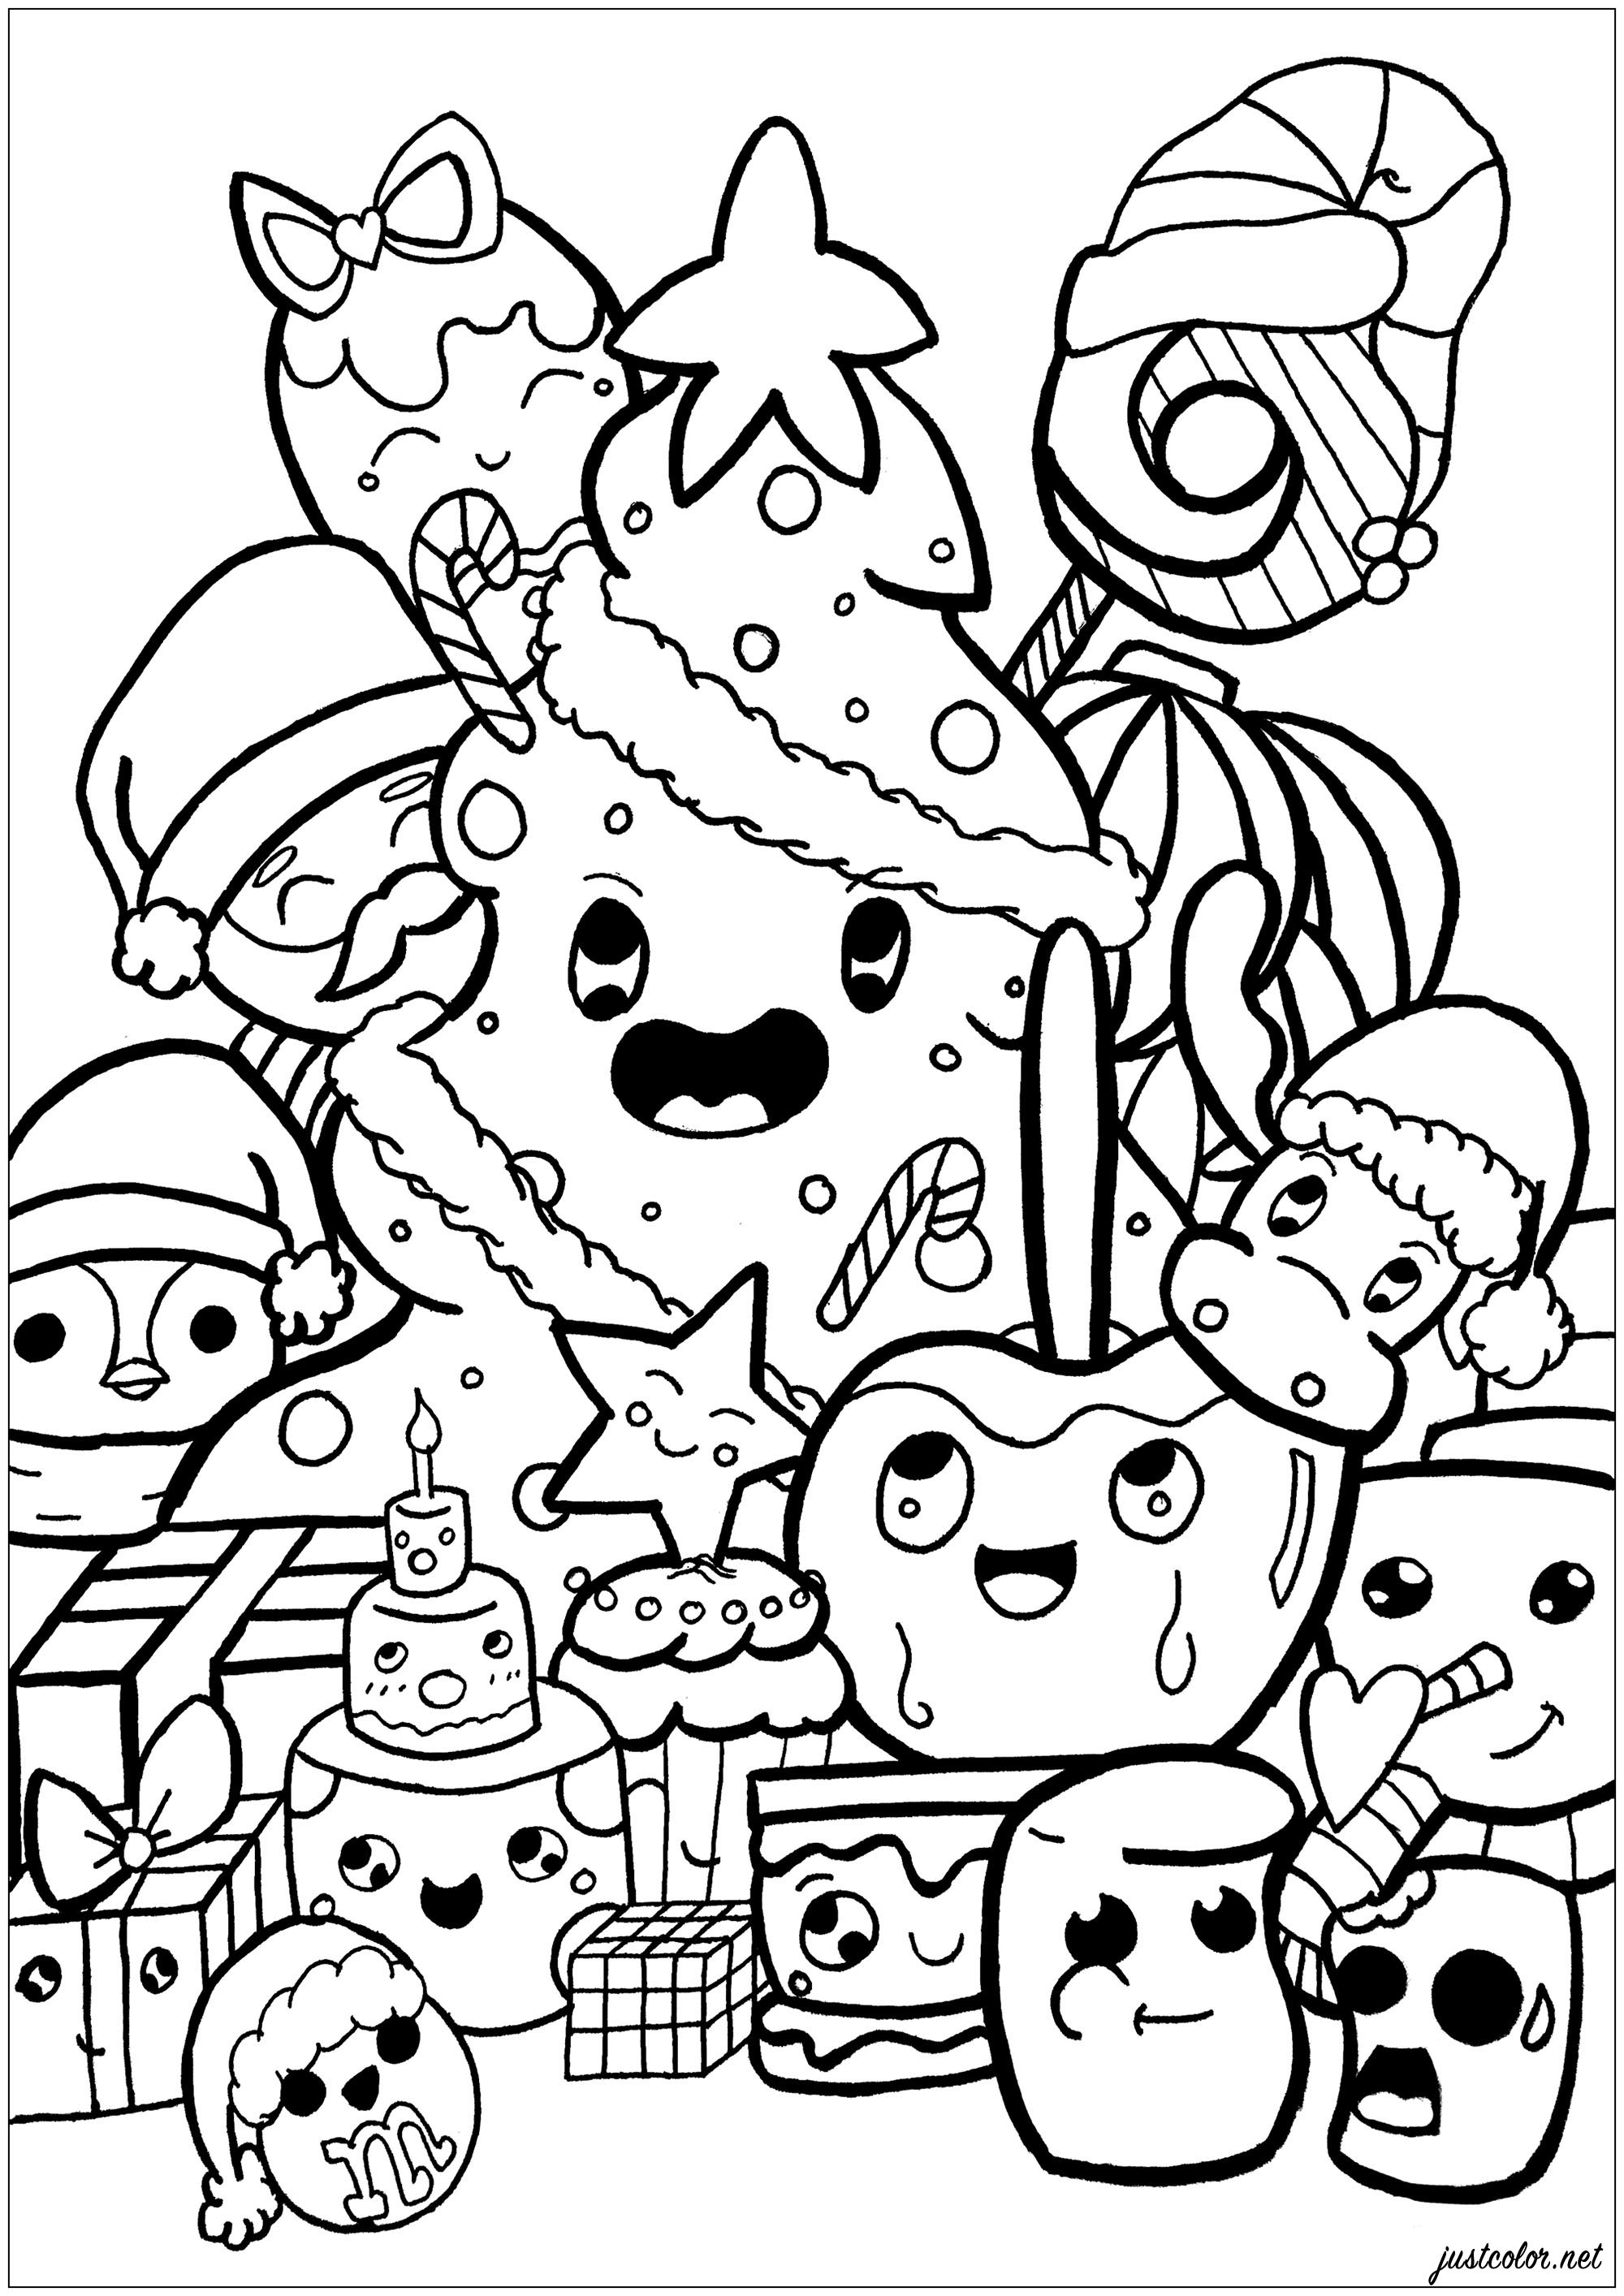 Christmas Doodle Doodle Art / Doodling Adult Coloring Pages